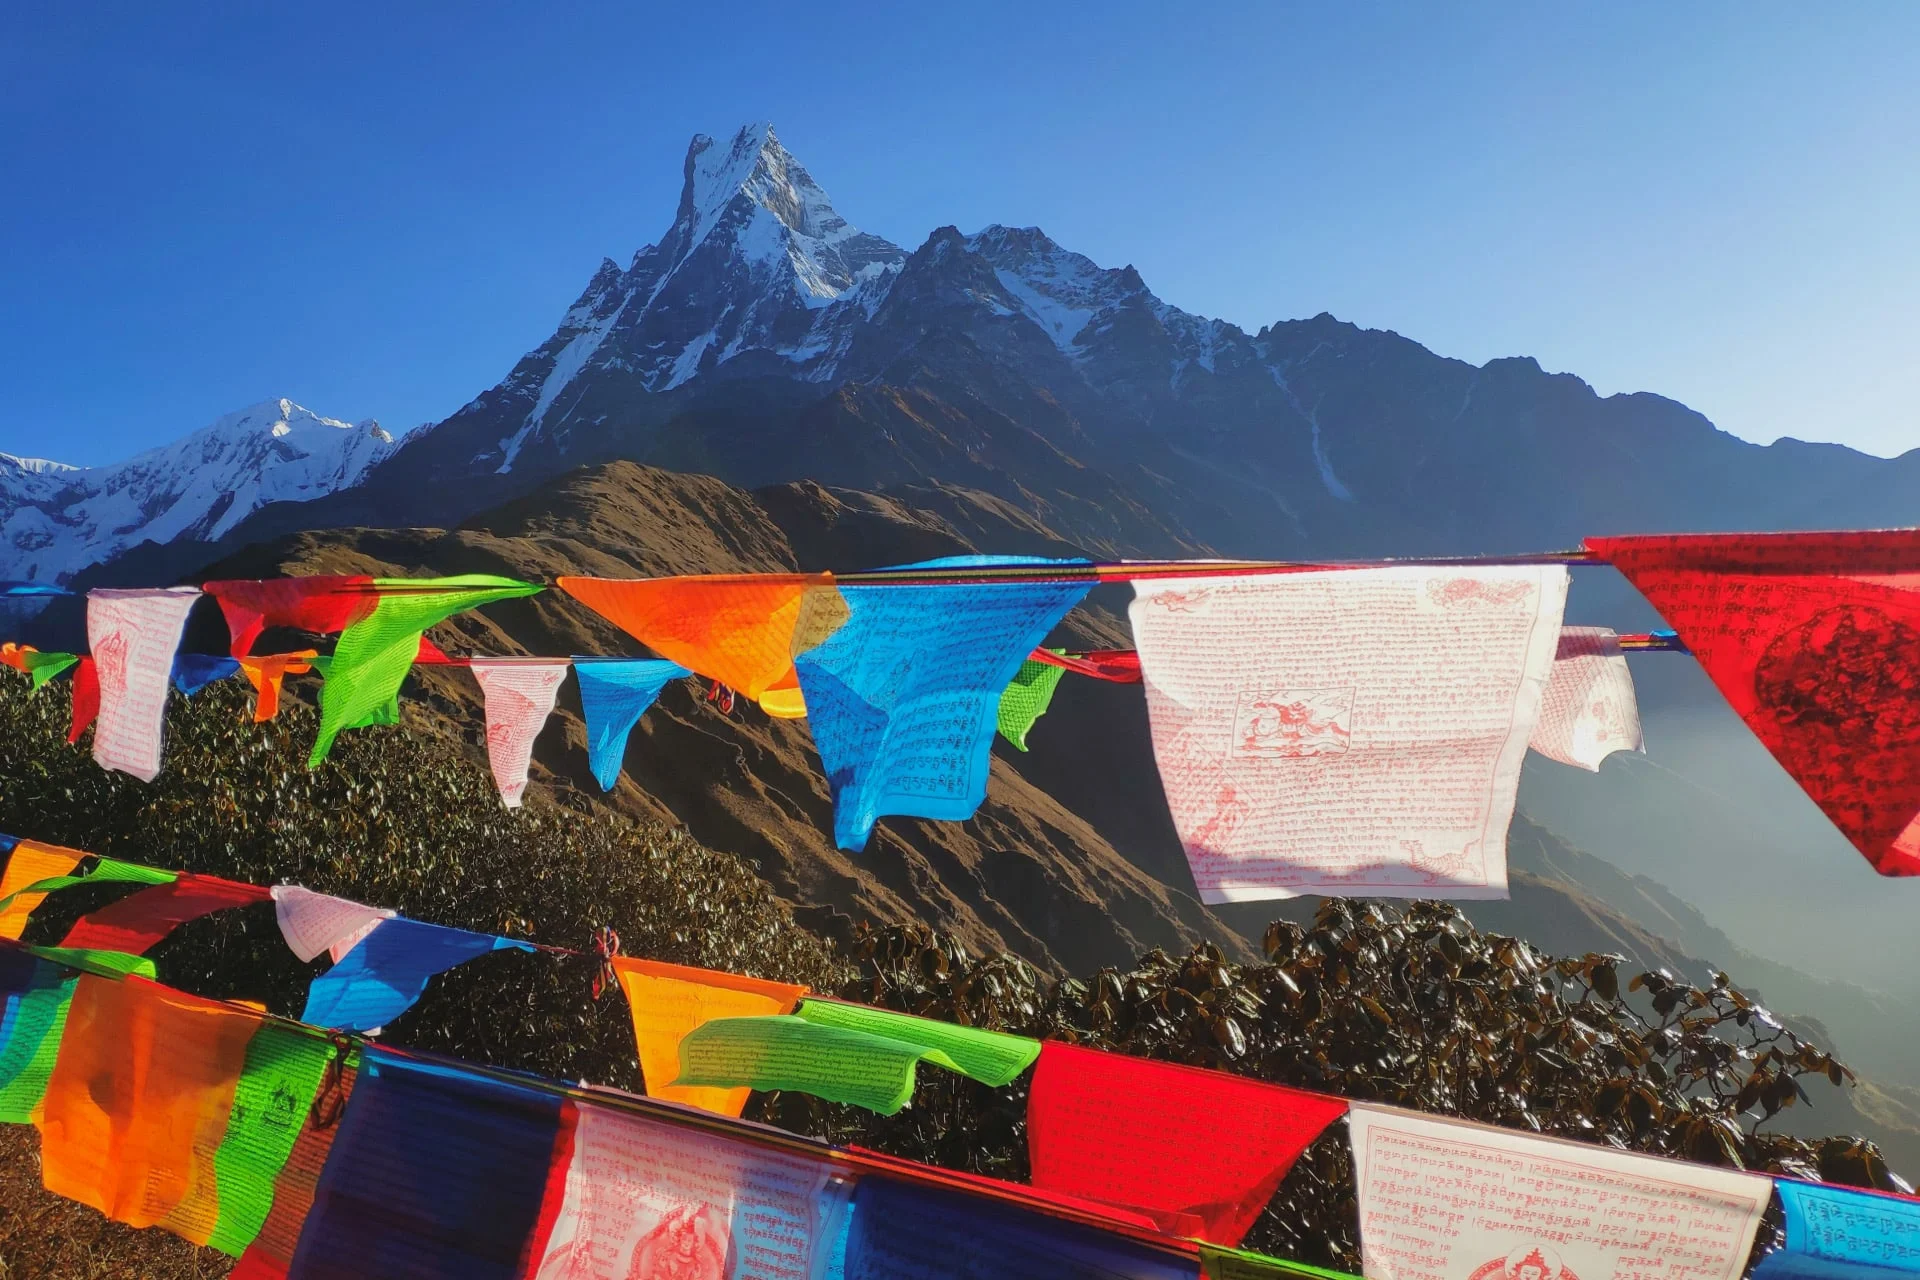 Prayer flags in front of a mountain with mountains in the background.